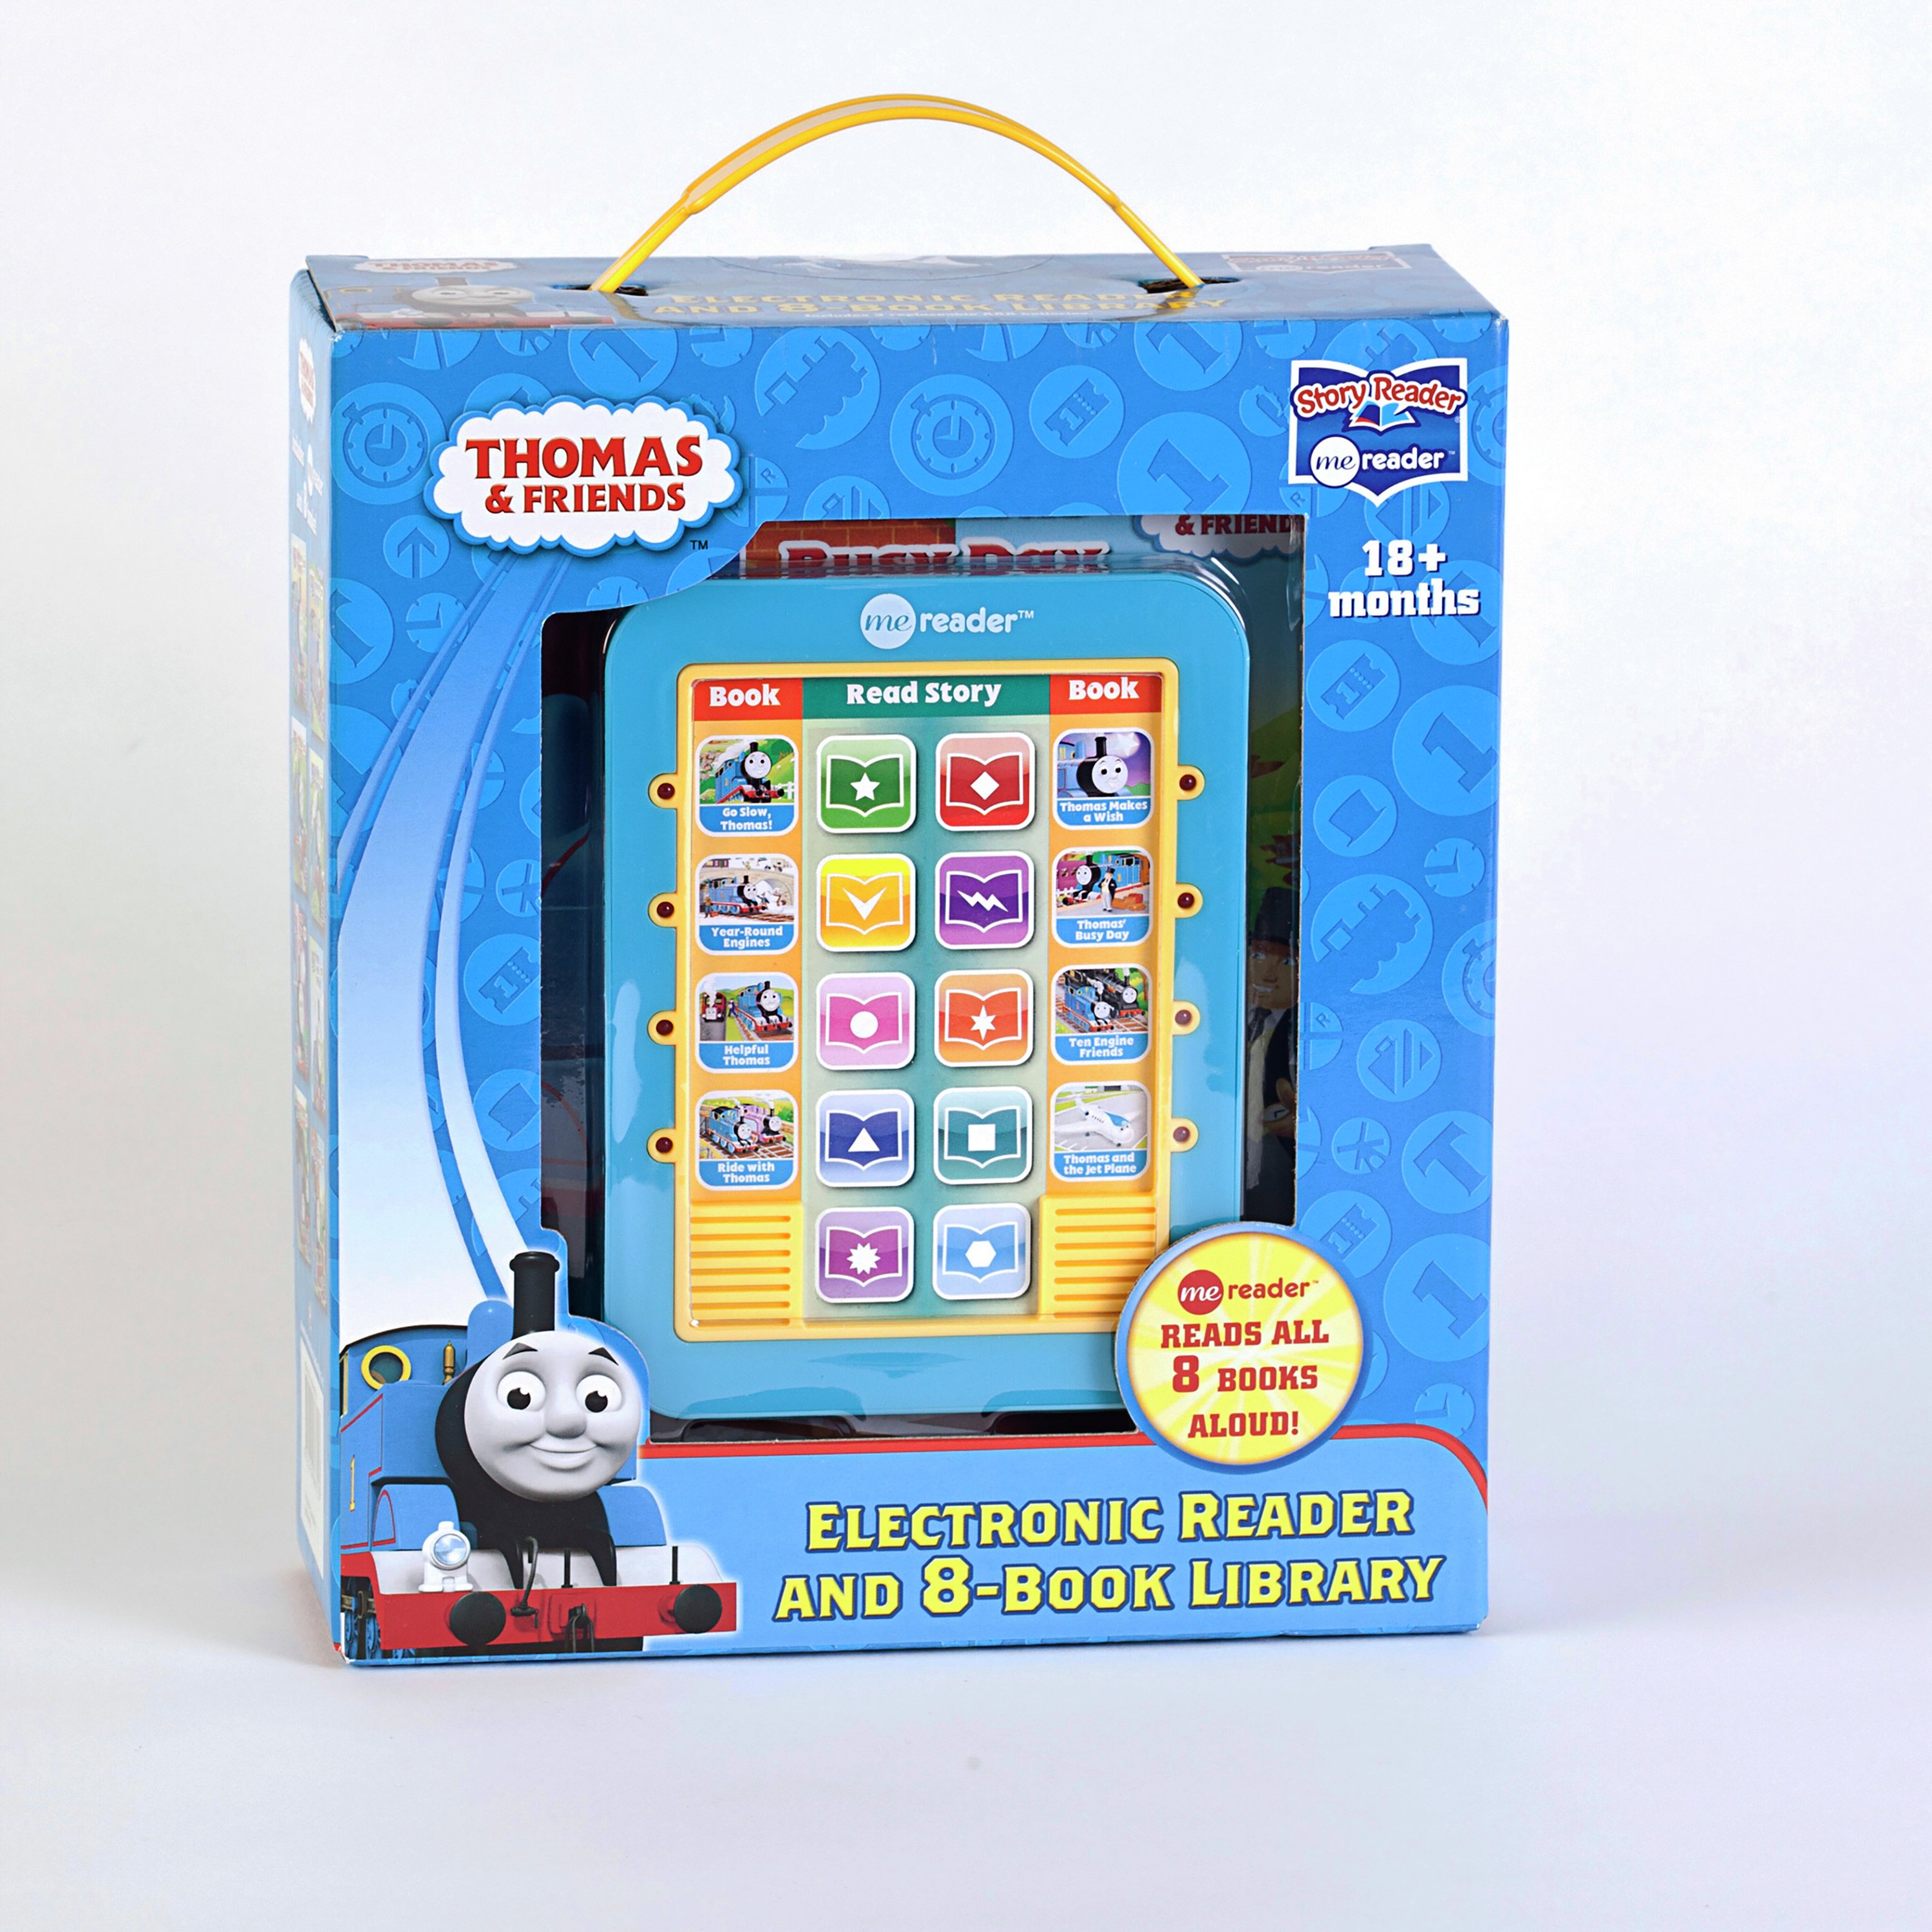 Thomas & Friends Electronic Reader. Review